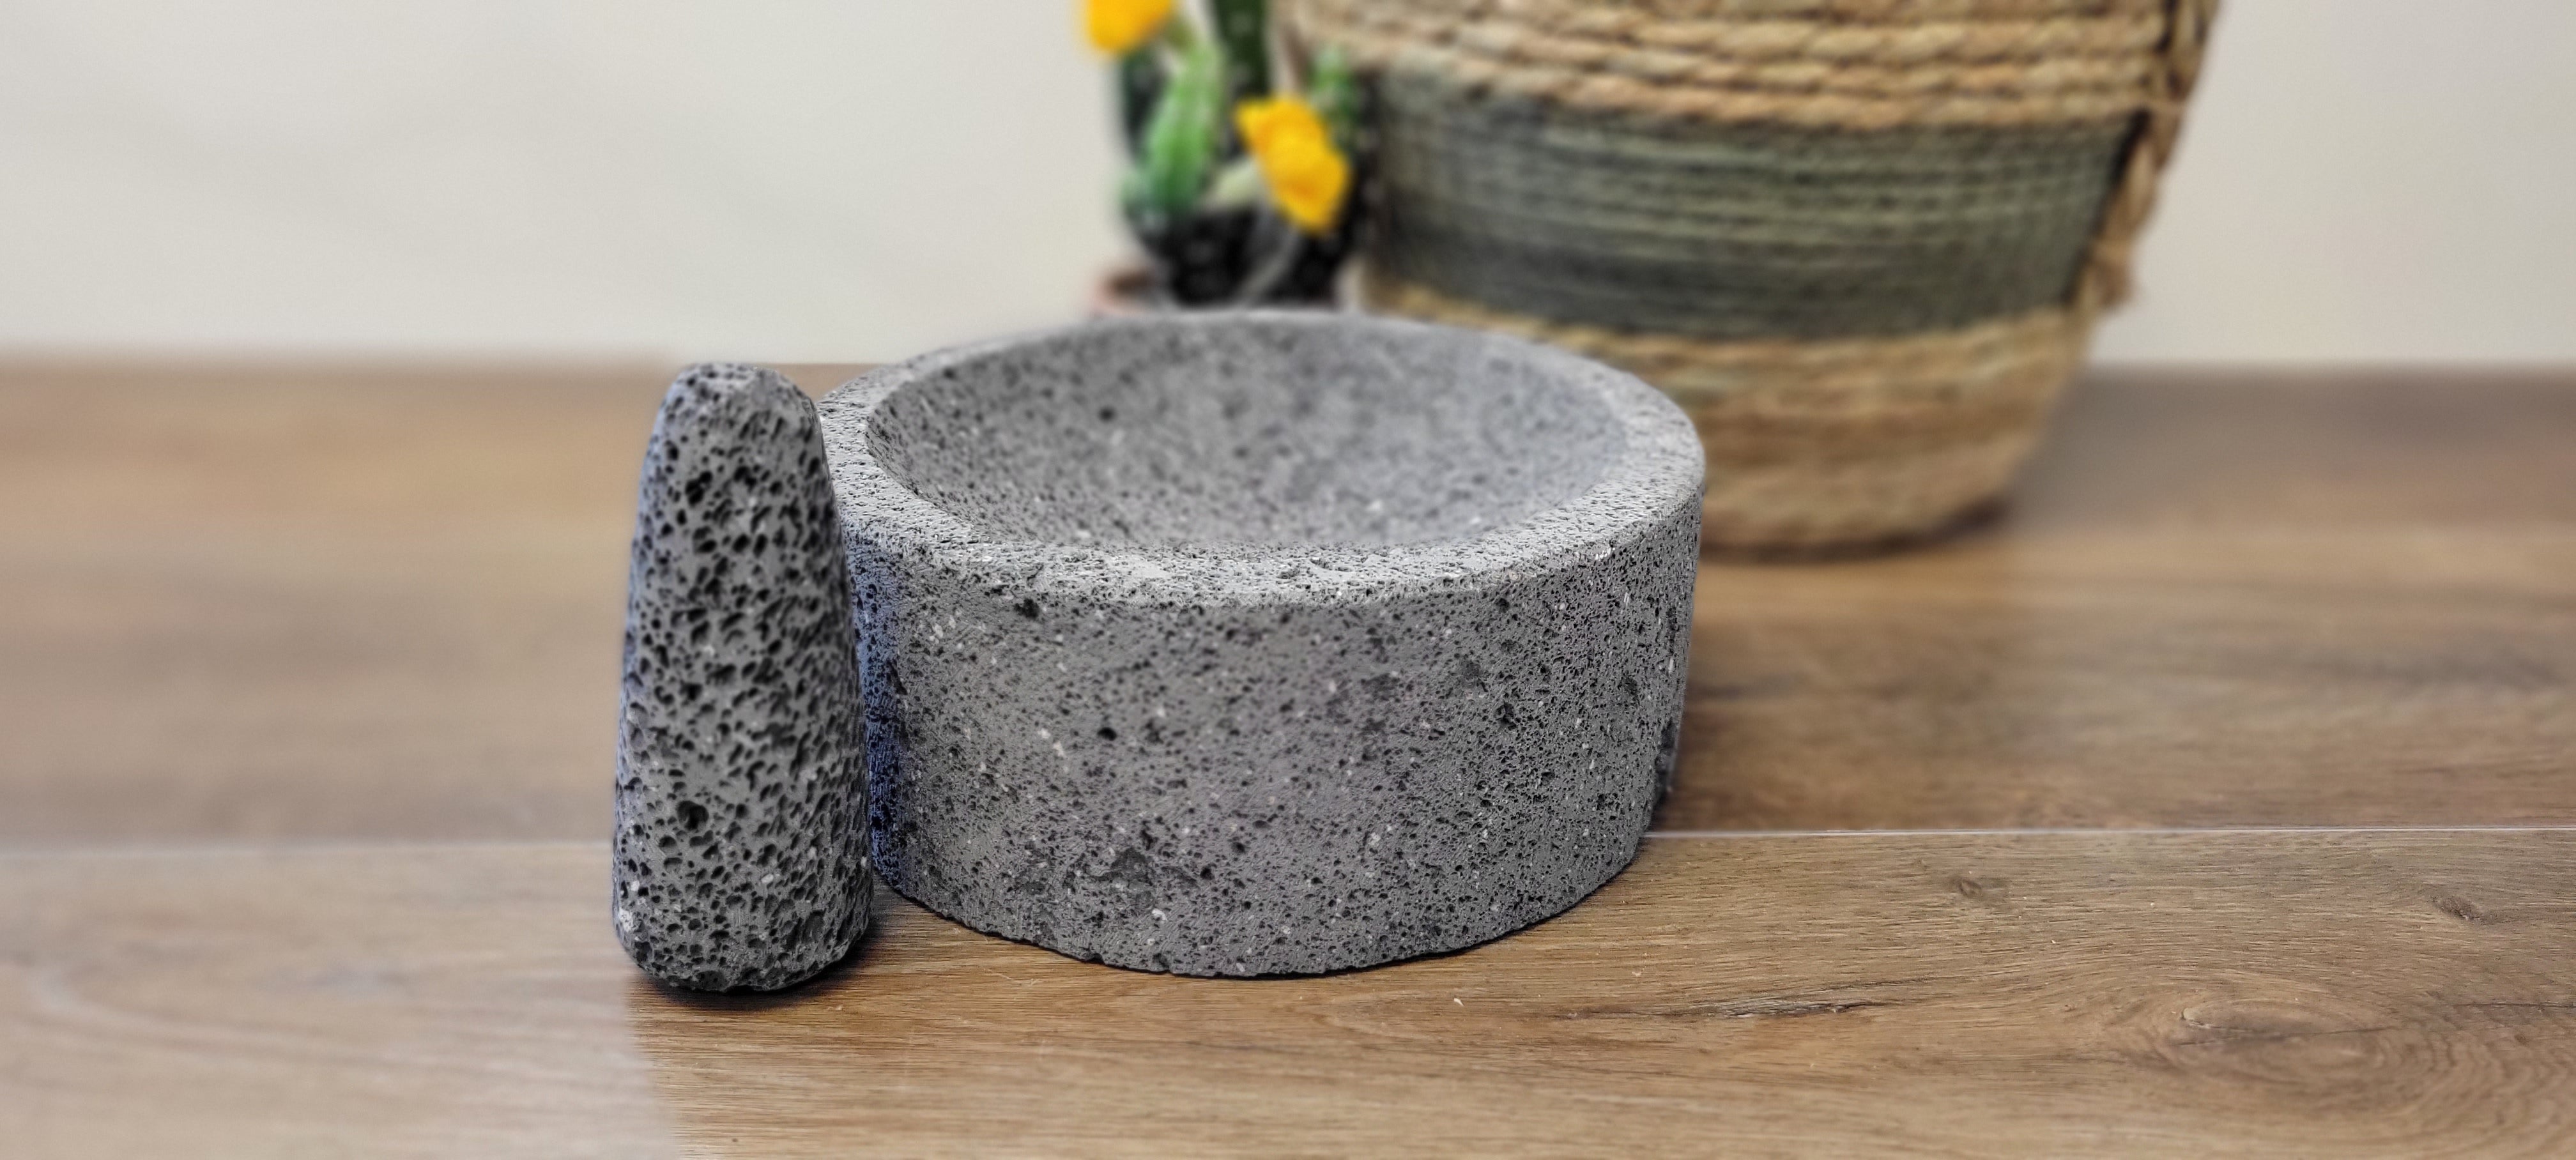 8 Inch Molcajete Bowl with Pestle made of Basalt Lava Rock. Handmade in Mexico. We hand finish, package, and ship from the USA. Buy now at www.felipeandgrace.com. 